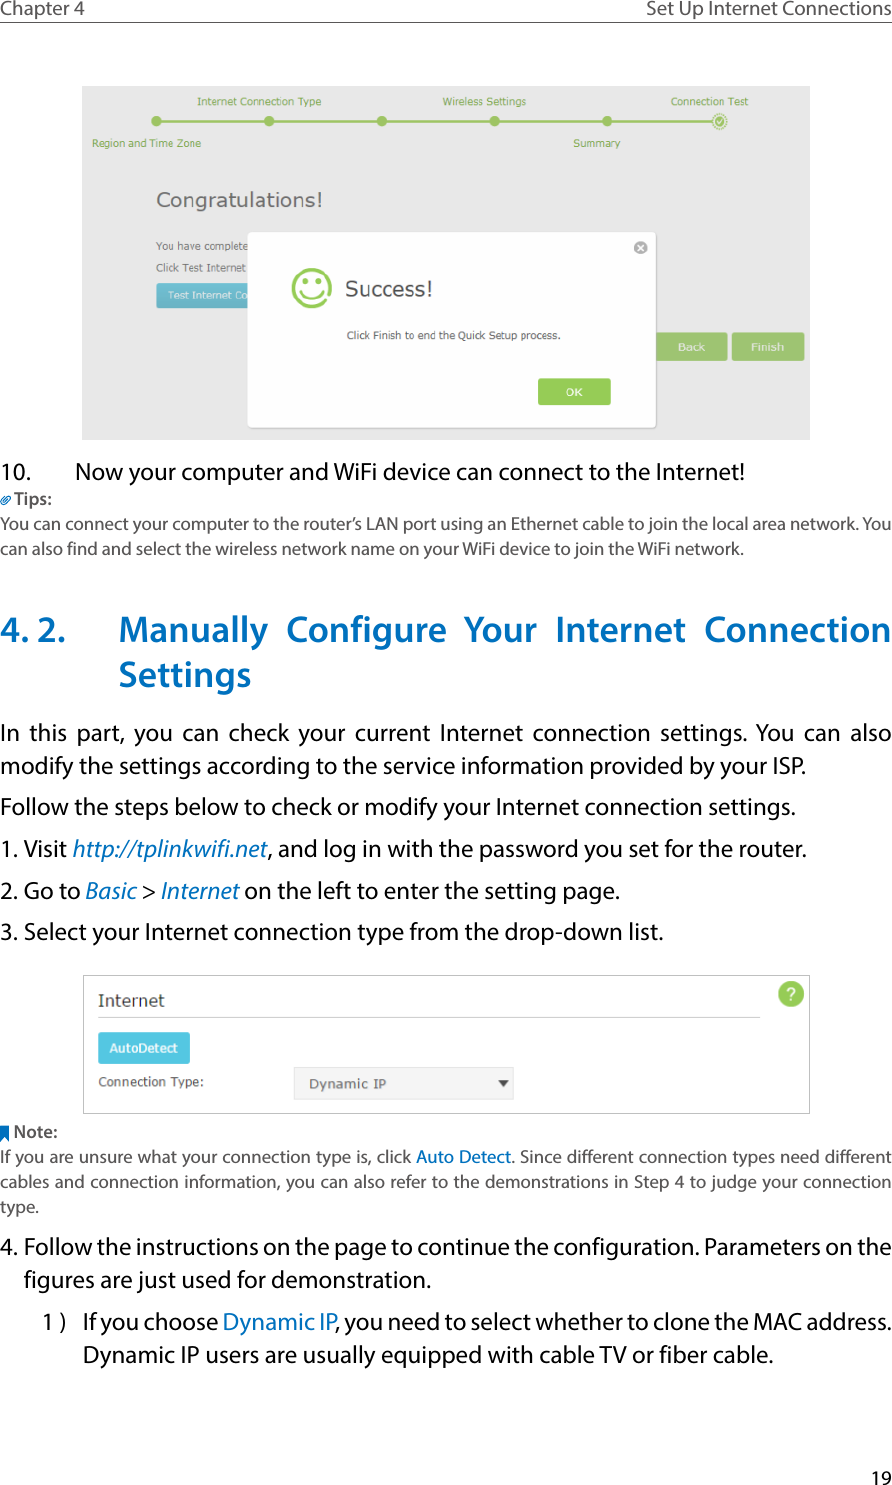 19Chapter 4 Set Up Internet Connections10.  Now your computer and WiFi device can connect to the Internet!Tips:You can connect your computer to the router’s LAN port using an Ethernet cable to join the local area network. You can also find and select the wireless network name on your WiFi device to join the WiFi network.4. 2.  Manually Configure Your Internet Connection SettingsIn this part, you can check your current Internet connection settings. You can also modify the settings according to the service information provided by your ISP.Follow the steps below to check or modify your Internet connection settings.1. Visit http://tplinkwifi.net, and log in with the password you set for the router.2. Go to Basic &gt; Internet on the left to enter the setting page.3. Select your Internet connection type from the drop-down list. Note:If you are unsure what your connection type is, click Auto Detect. Since different connection types need different cables and connection information, you can also refer to the demonstrations in Step 4 to judge your connection type.4. Follow the instructions on the page to continue the configuration. Parameters on the figures are just used for demonstration. 1 )  If you choose Dynamic IP, you need to select whether to clone the MAC address. Dynamic IP users are usually equipped with cable TV or fiber cable.